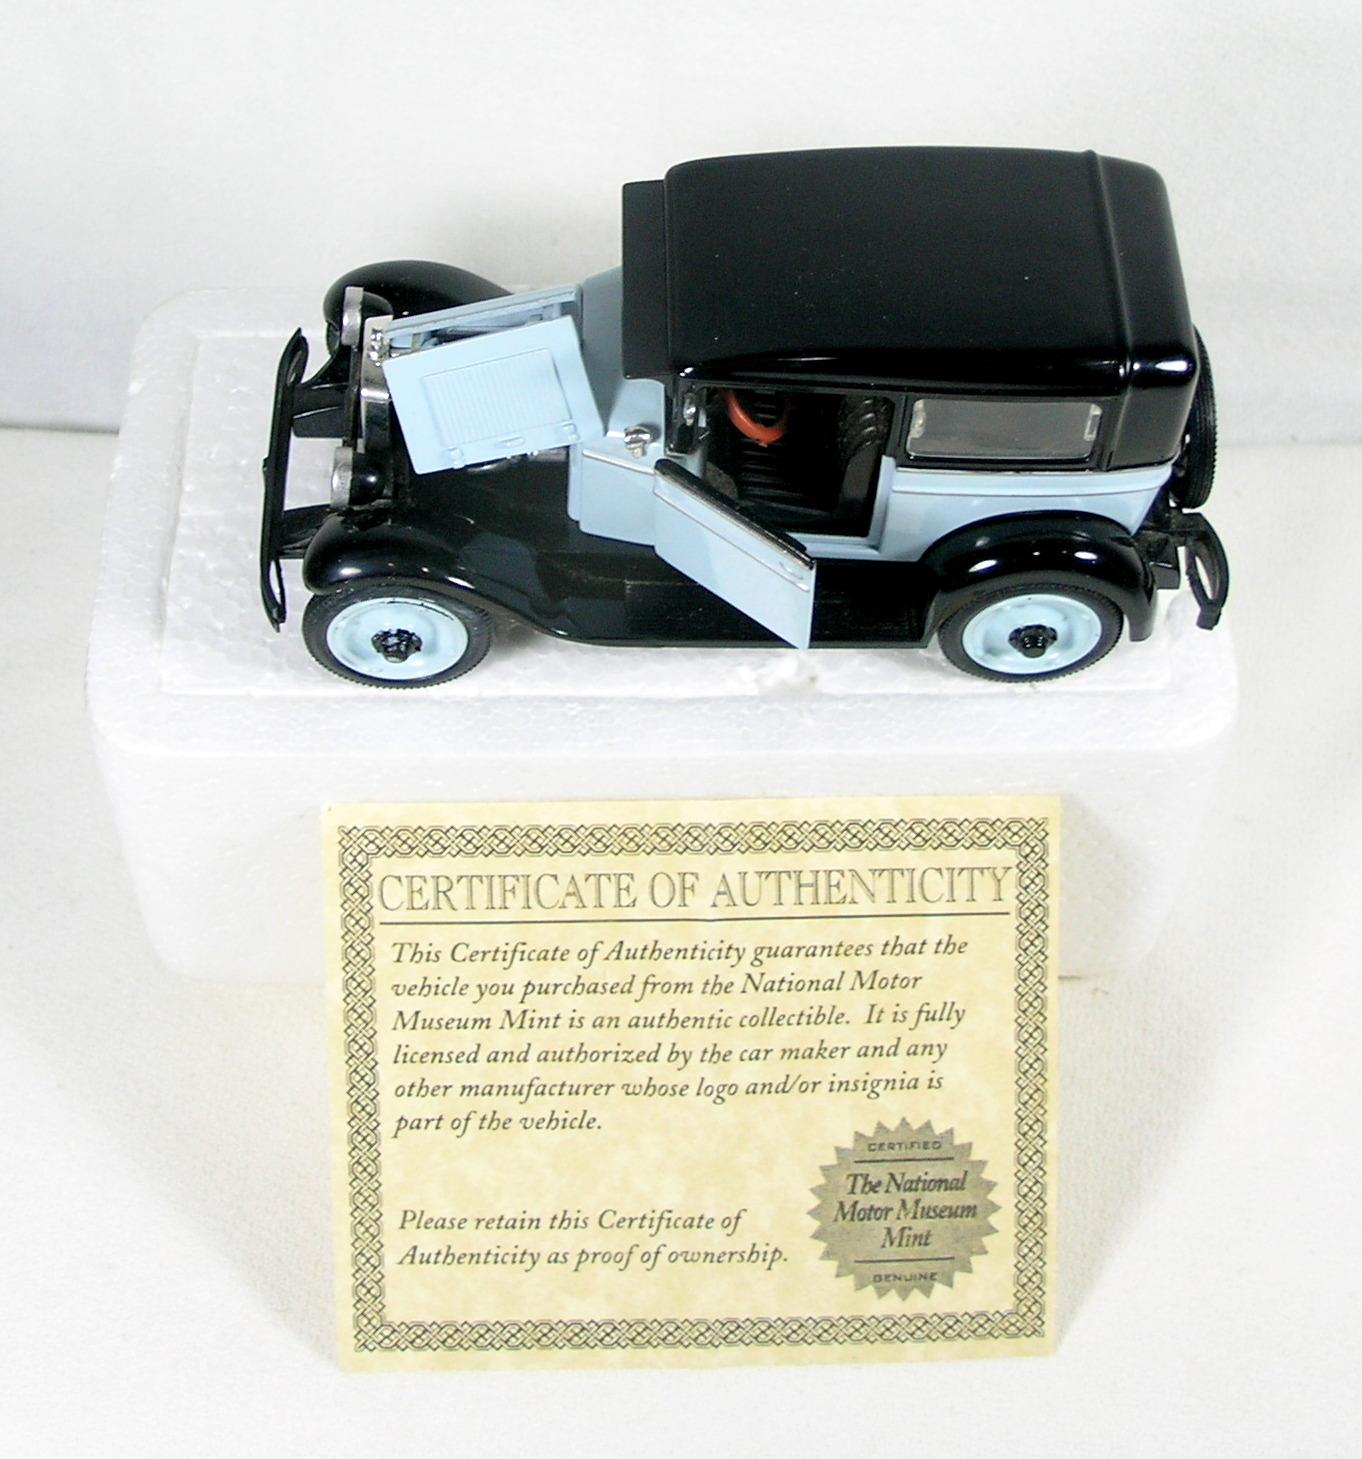 Diecast Replica of 1928 Chevy National Series AB From National Motor Museum